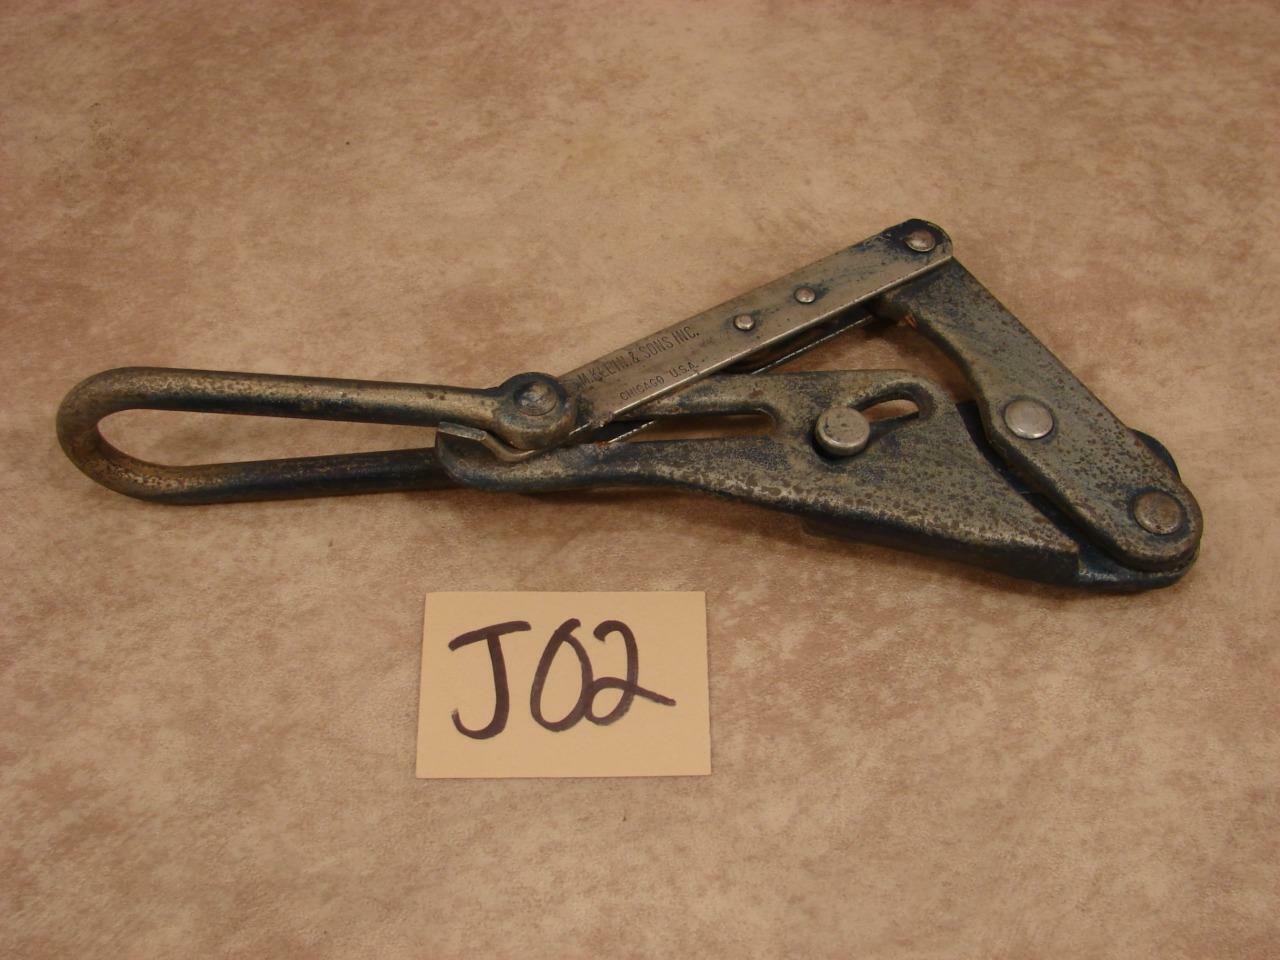 J02 VINTAGE KLEIN TOOLS HEAVY DUTY CABLE WIRE ROPE GRIP PULLER 1613-40B